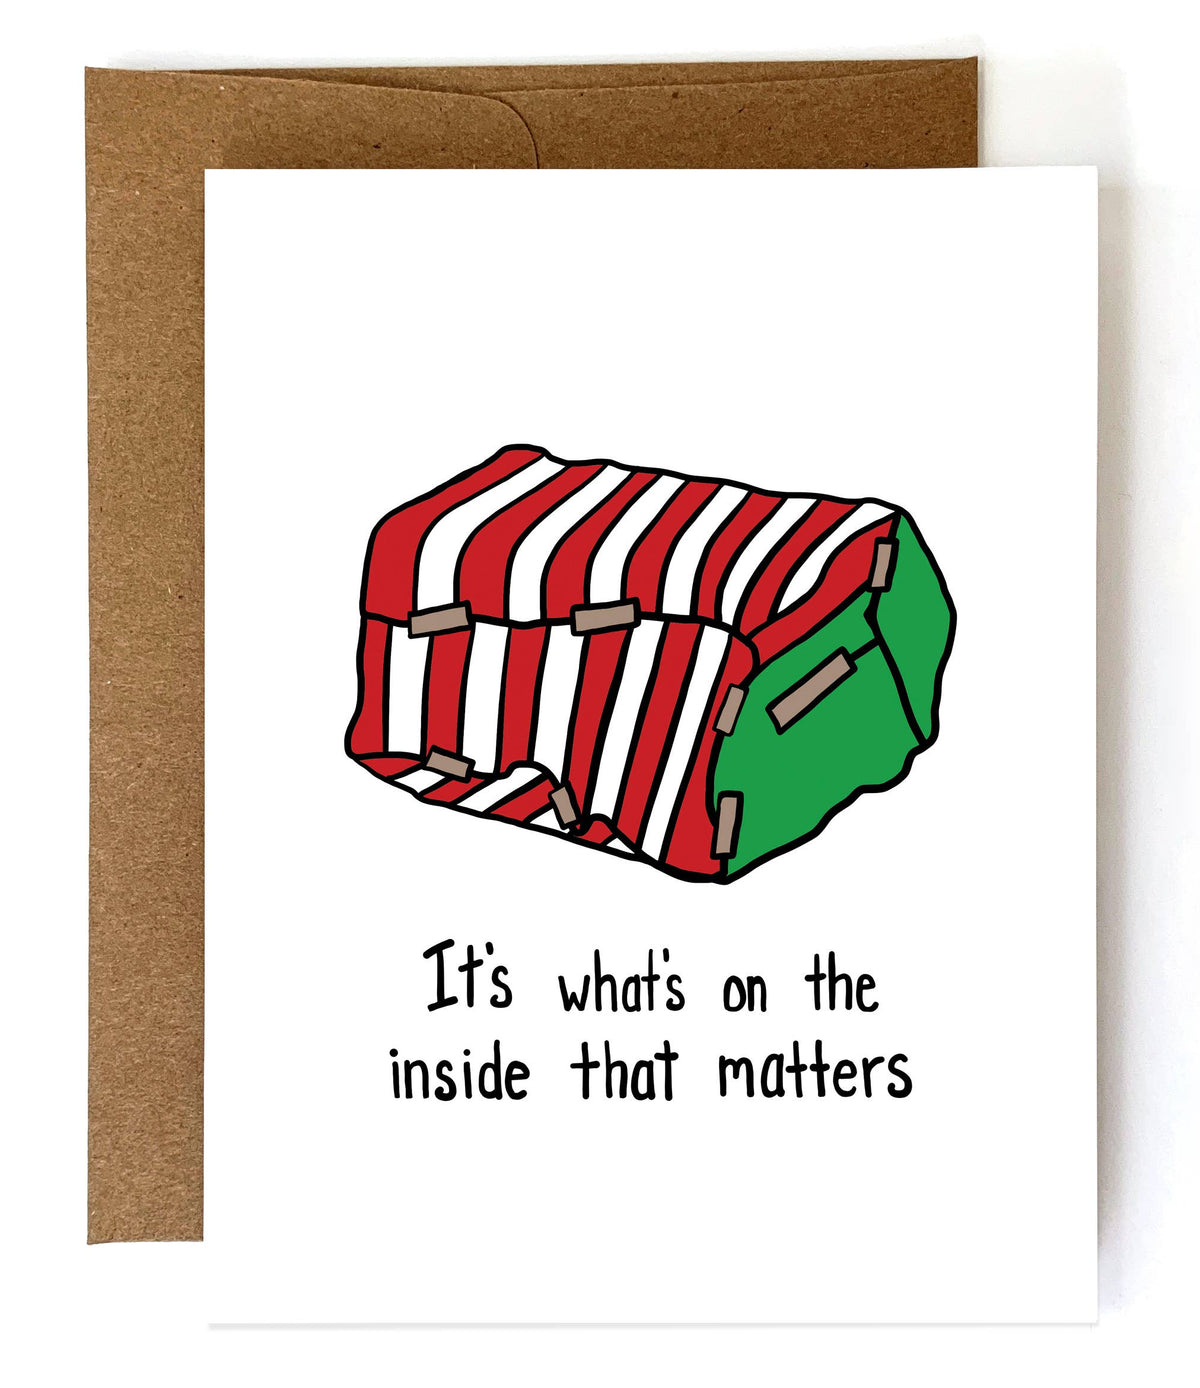 Funny Illustrated Christmas Card of Bad Wrapping Reads It's What's on the Inside that Matters